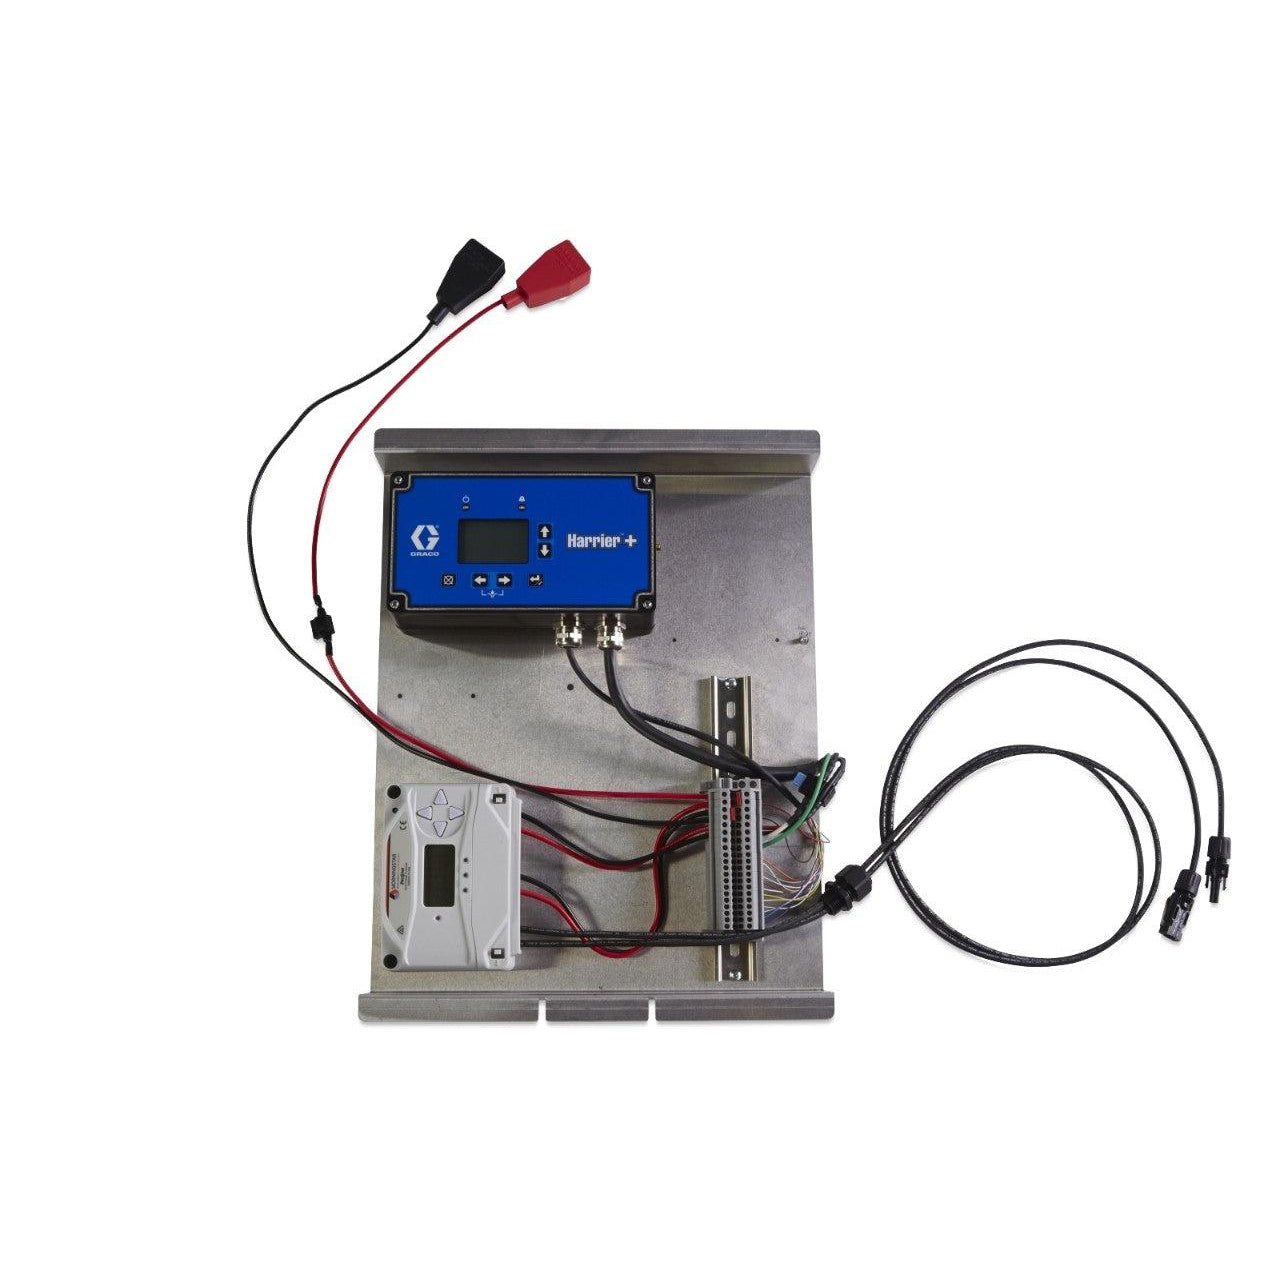 Four-Battery Control Box with Harrier EZ Controller and Includes ASC 24/16 One Panel Charge Controller